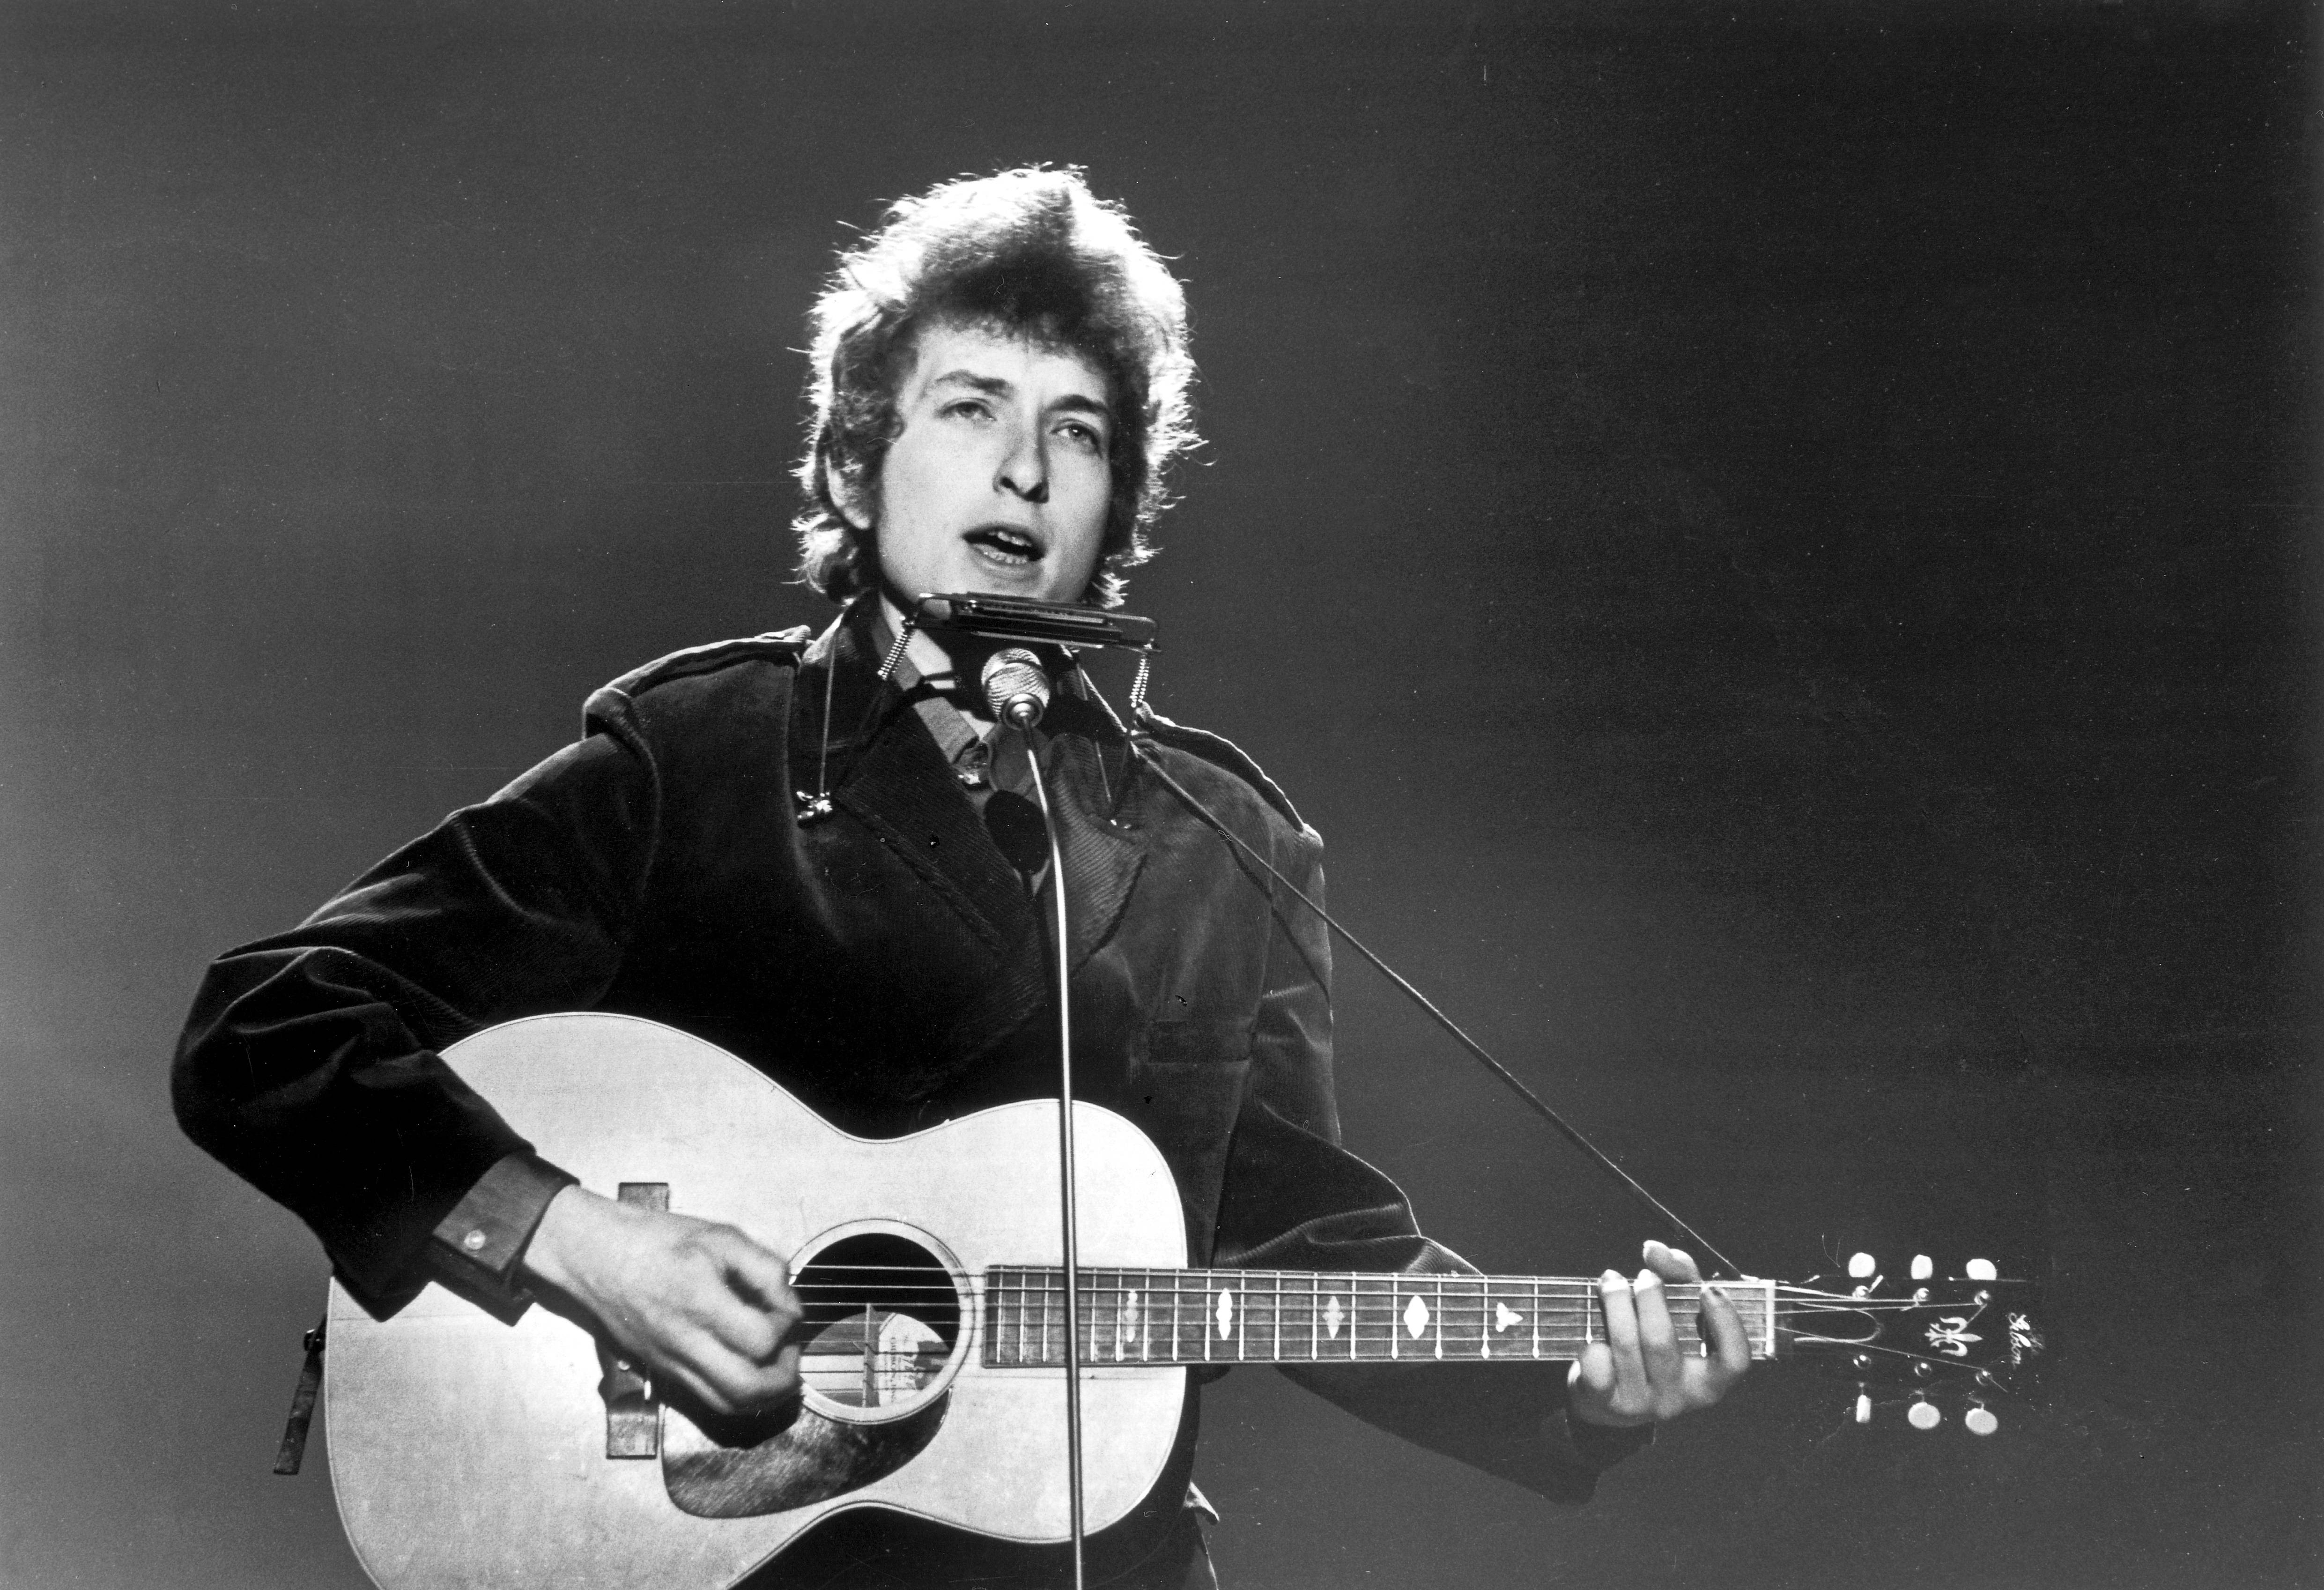 Bob Dylan with a guitar